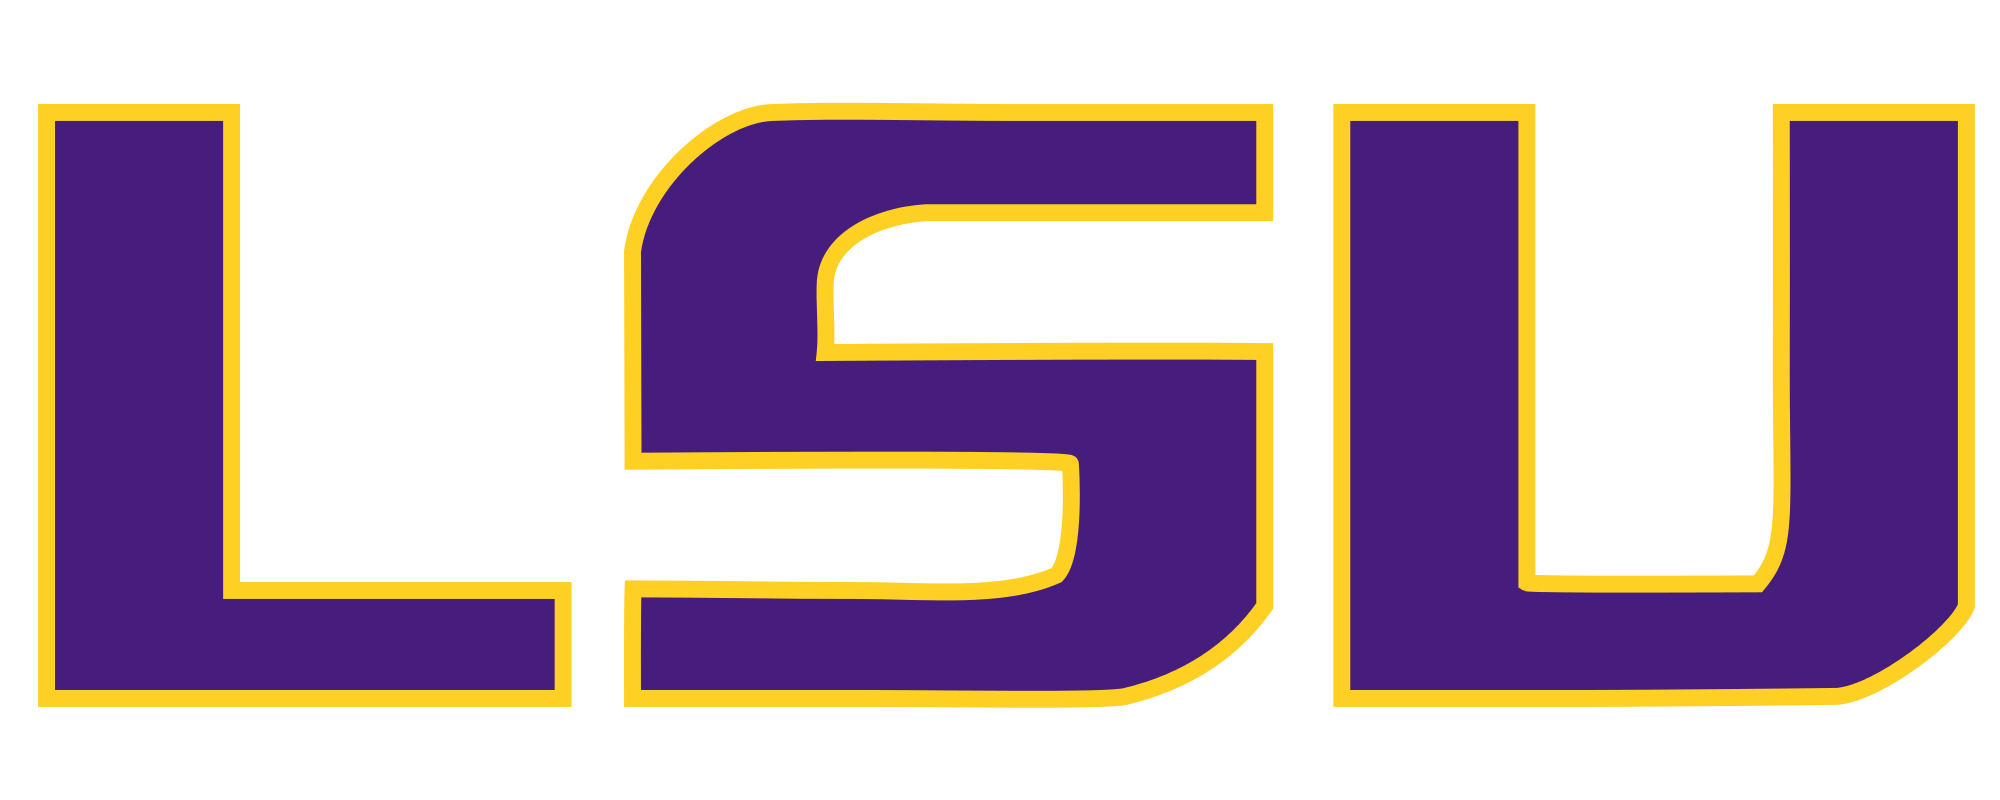 Free Lsu Logo Download, Download Free Lsu Logo Download png image, Free ClipArts on Clipart Library